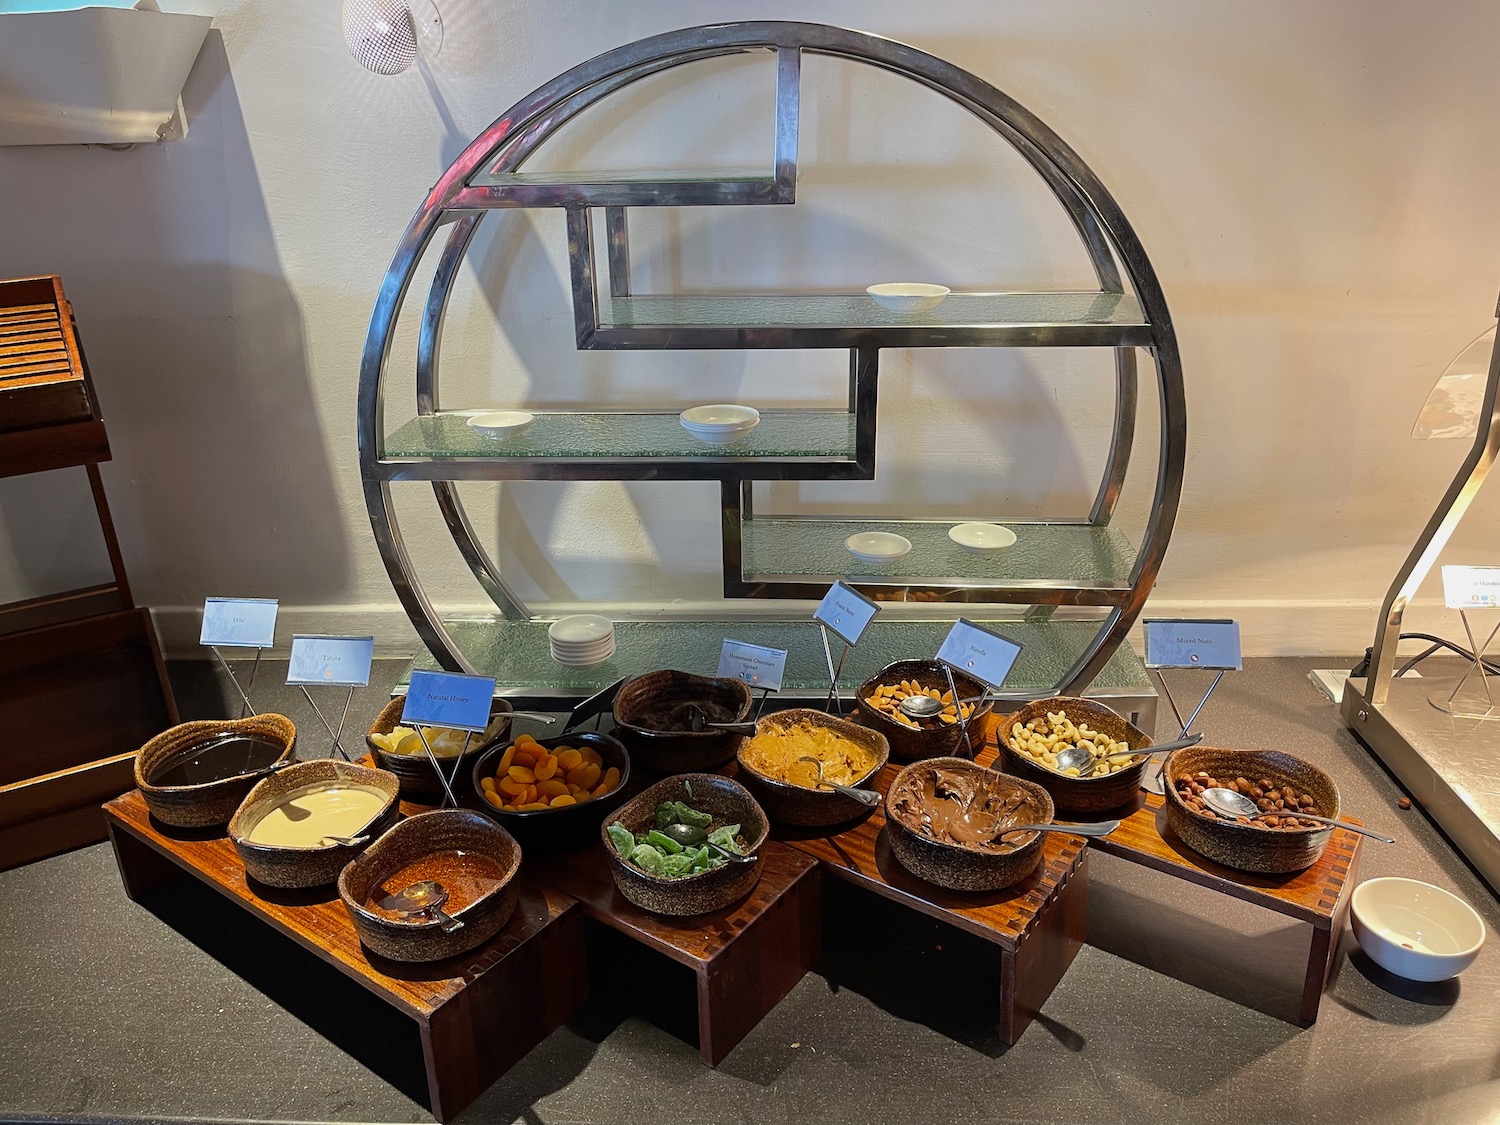 a group of bowls of food on a shelf